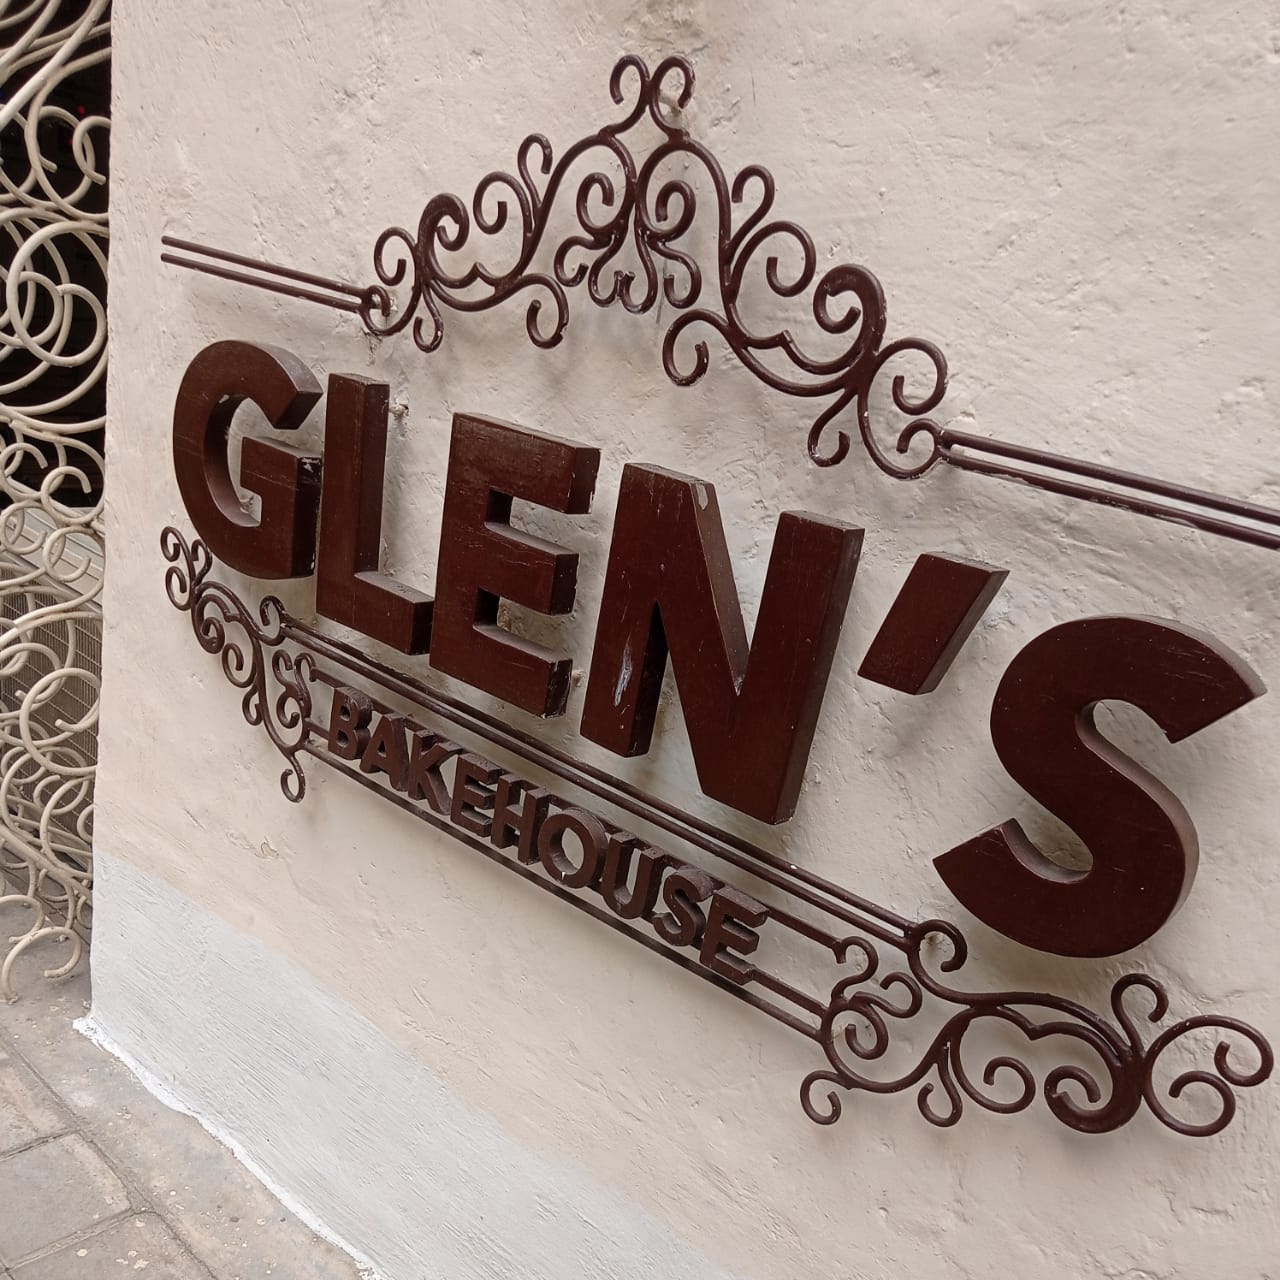 Glen&rsquo;s Bakehouse; to satiate one&rsquo;s sweet tooth :D